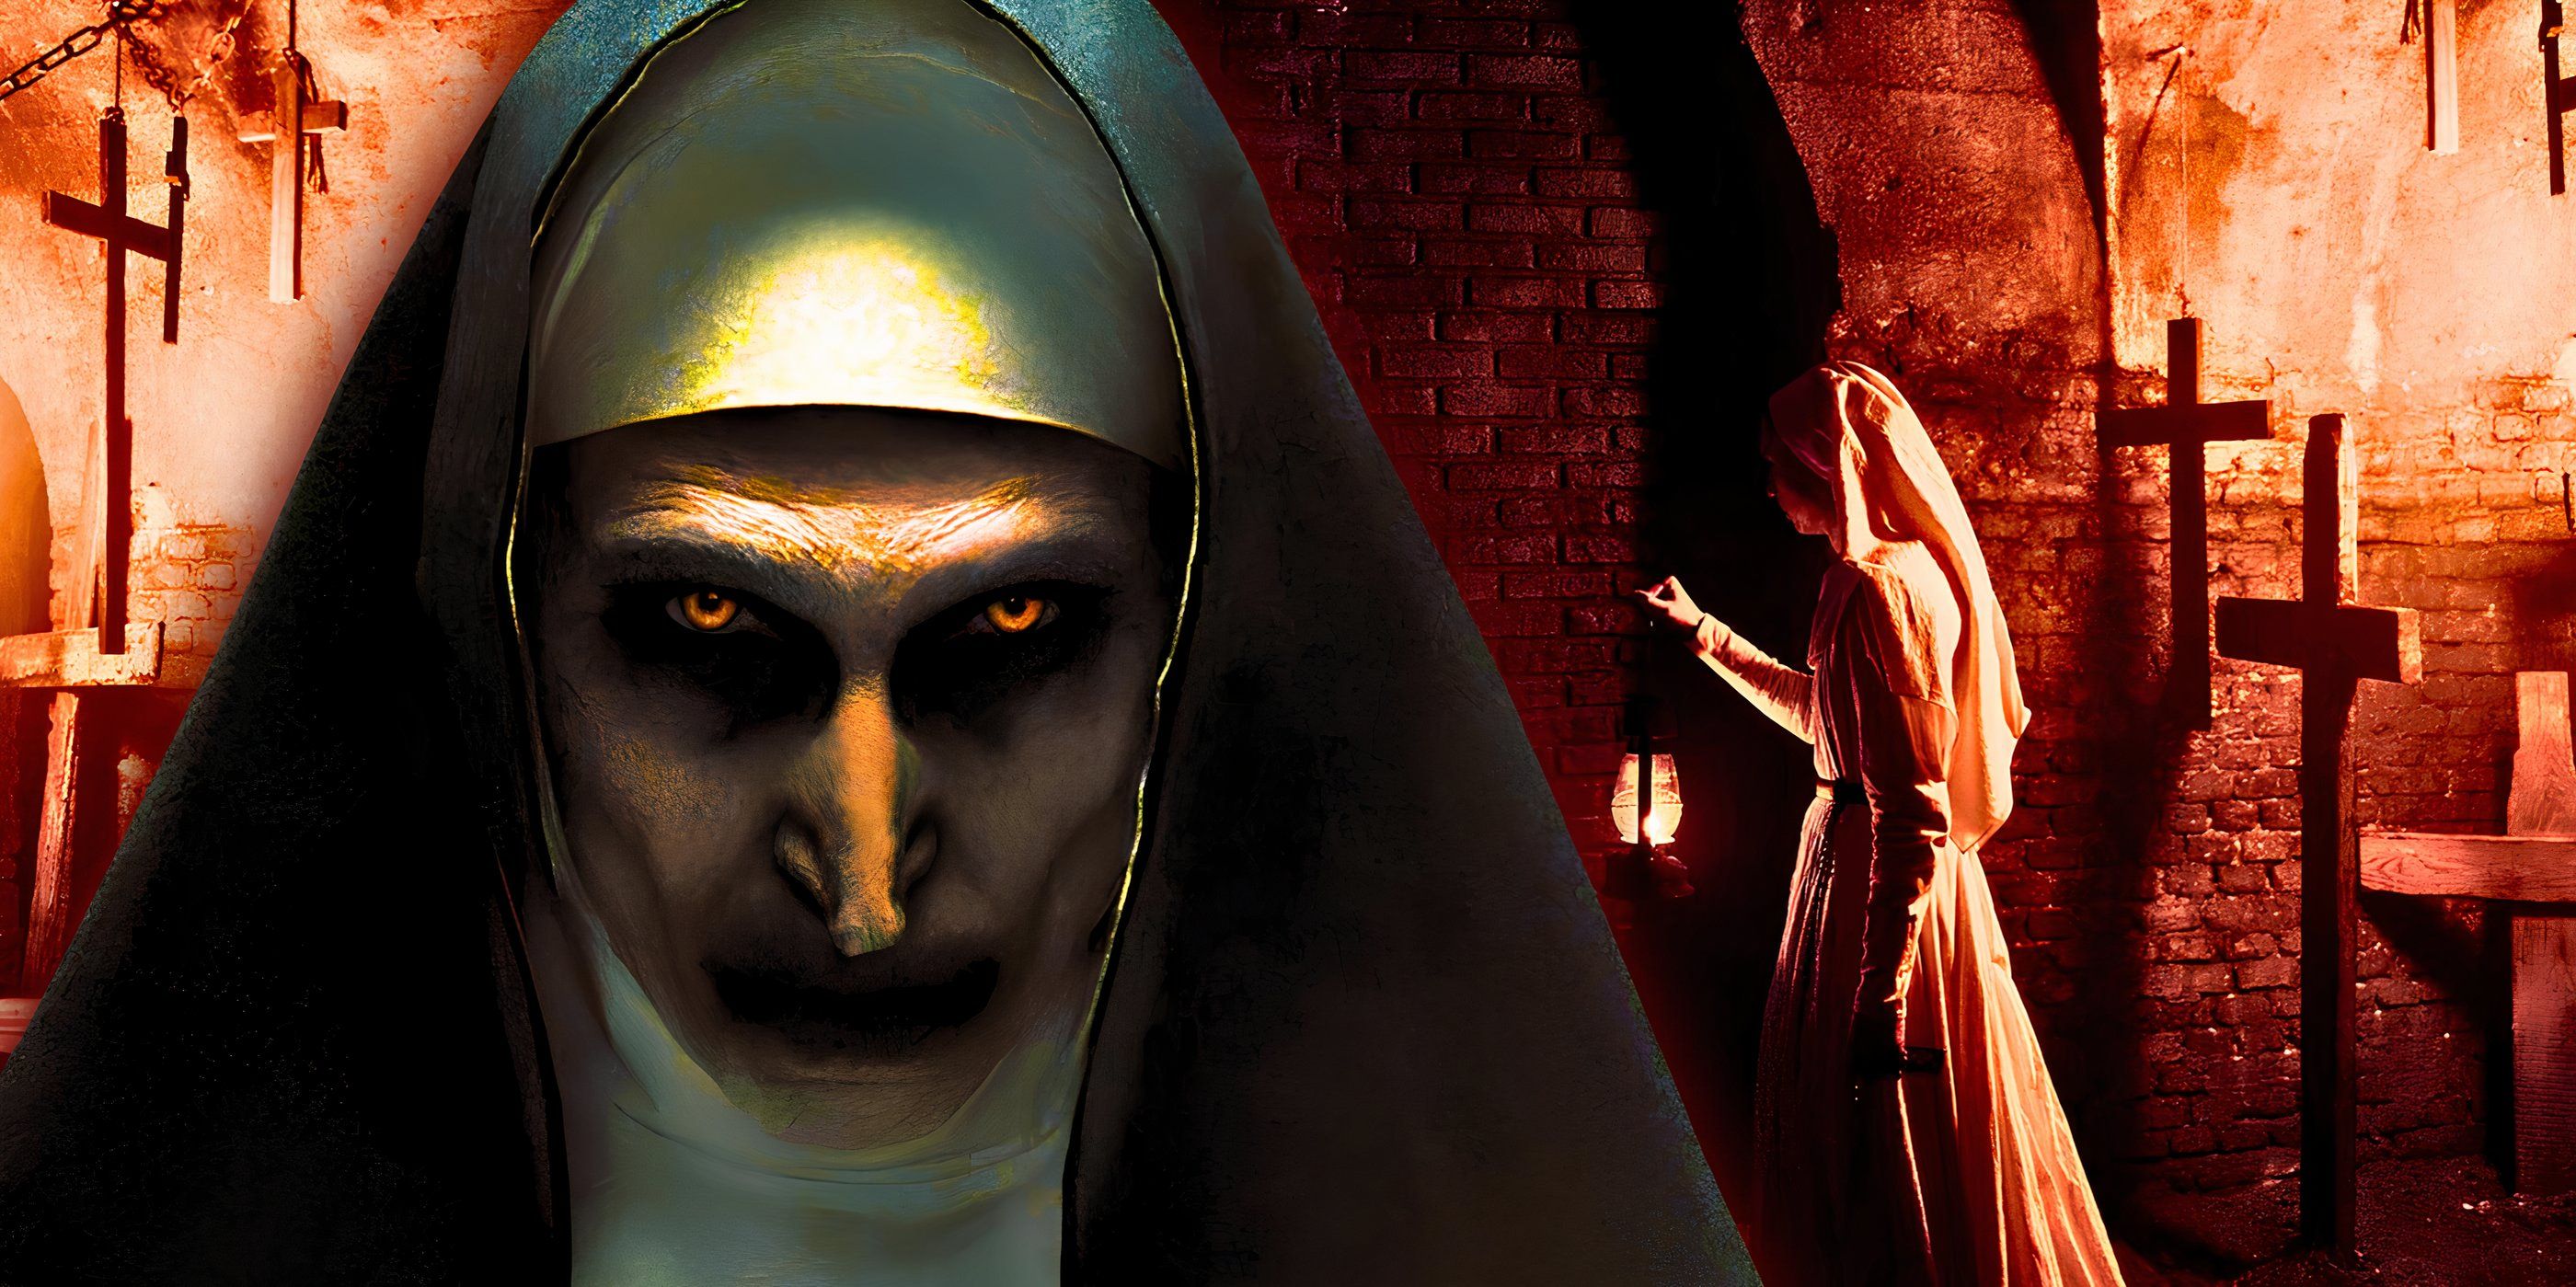 Valak's nun form is in front of a monastery in The Nun.